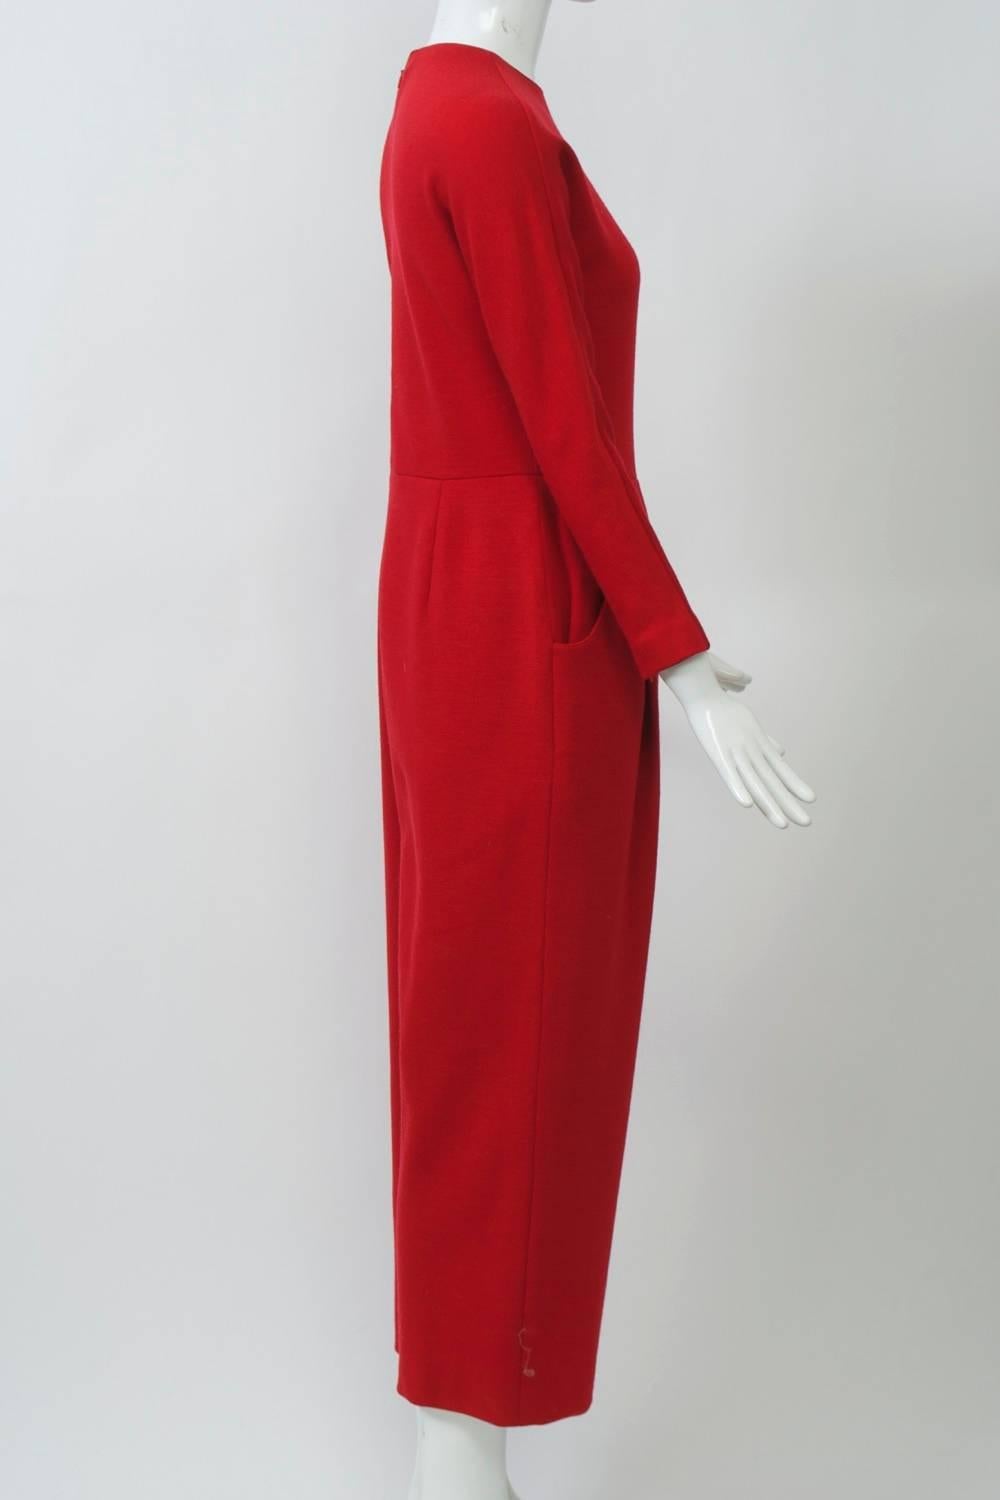 Jumpsuit by Geoffrey Beene in red wool knit featuring a round collar, waist seam with faux fly front, dolman sleeves with zippered wrists, and curved side pockets. Ankle-length pants. Back zipper; bottom lined. Approximate contemporary size 6.